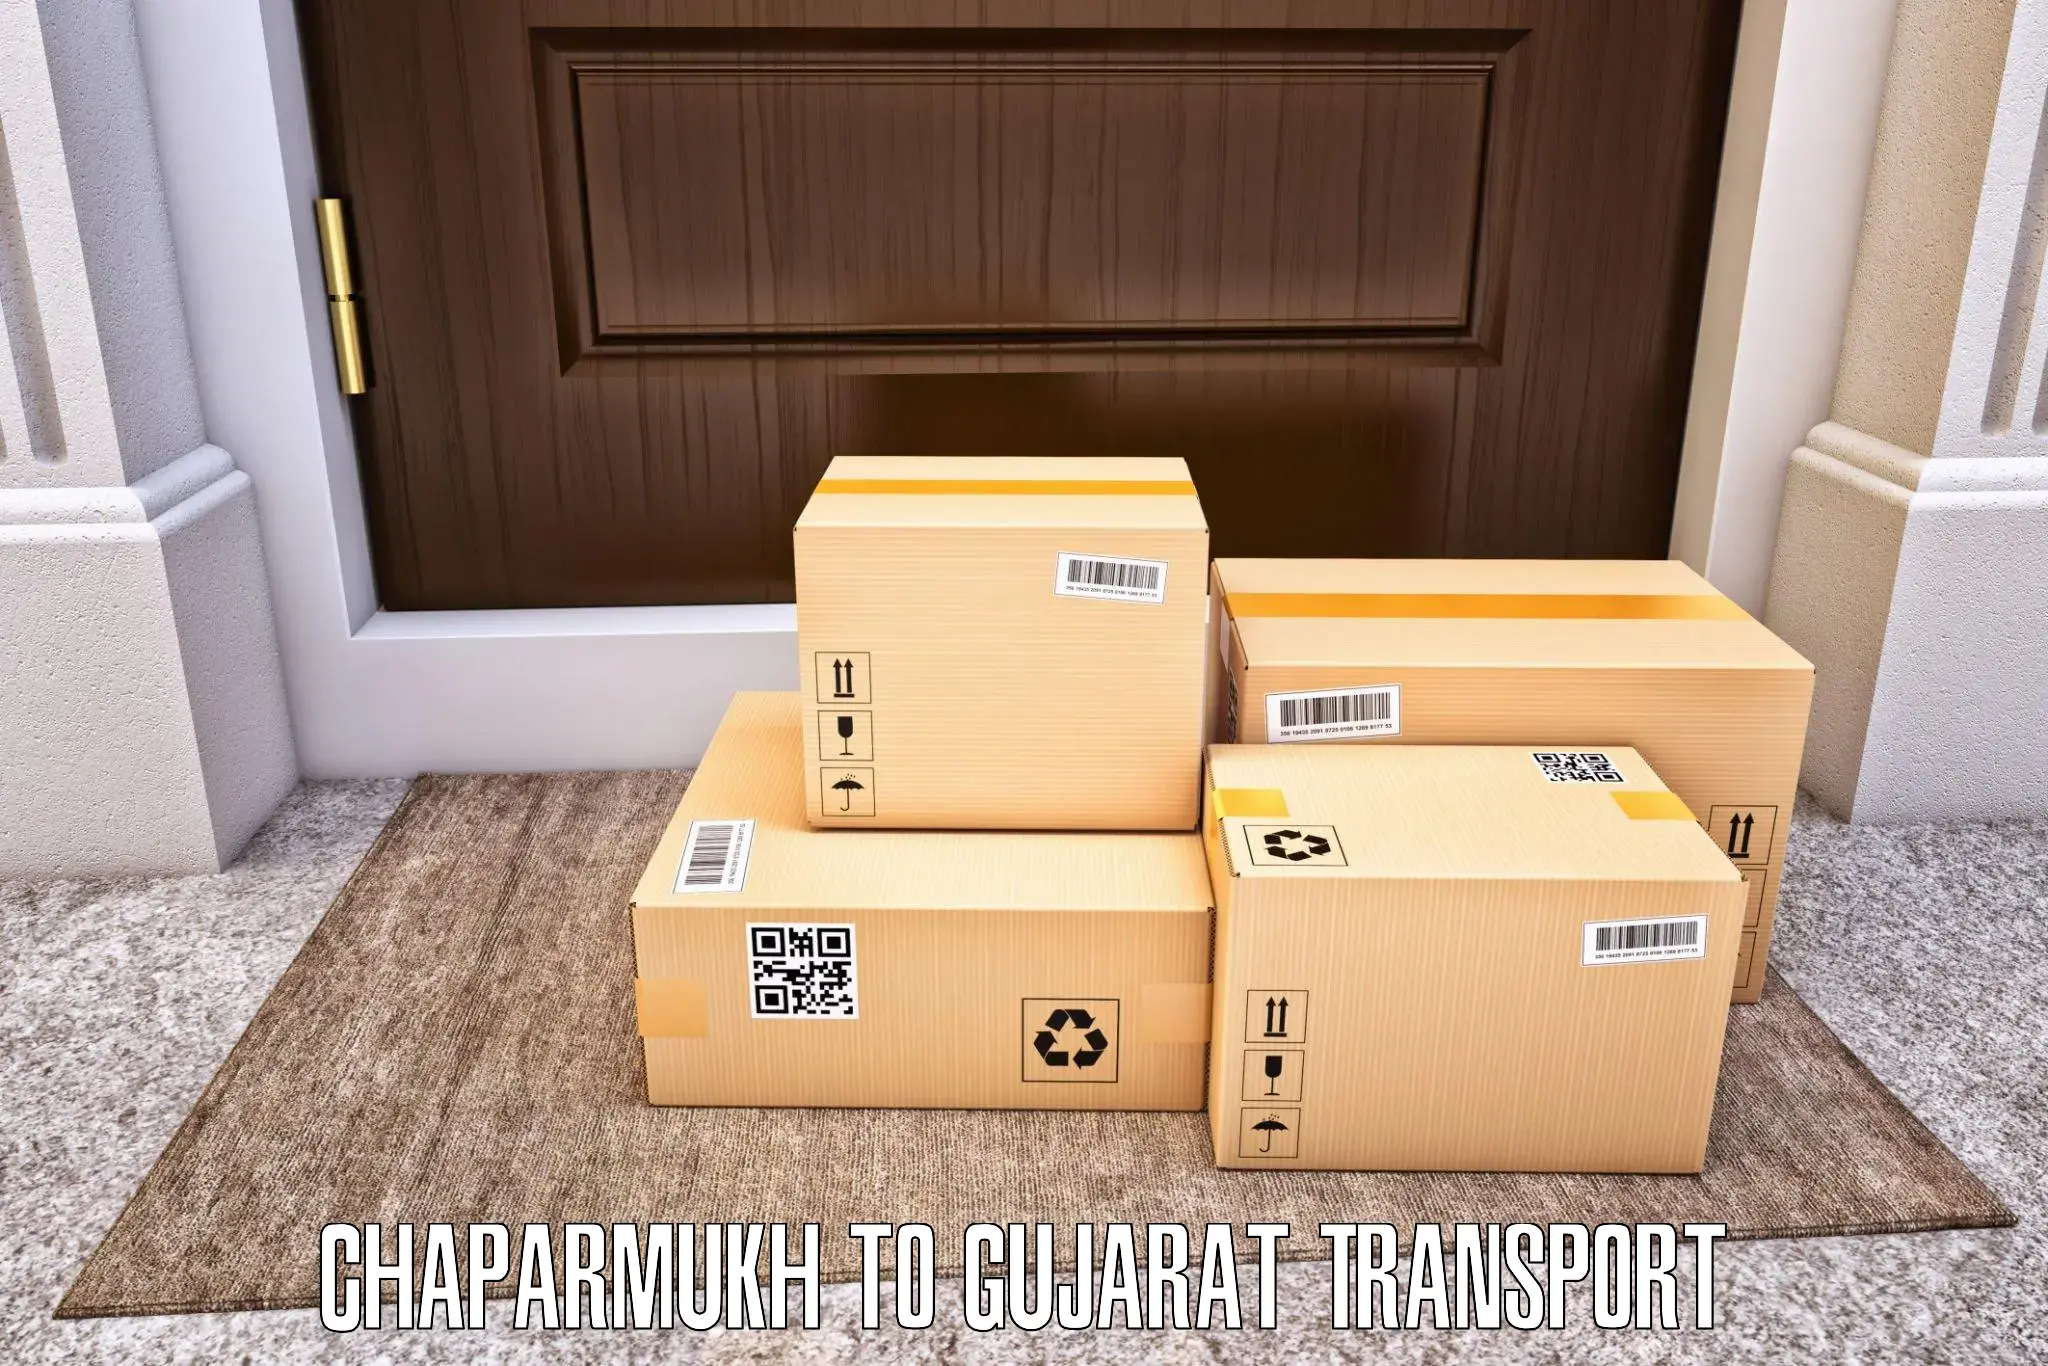 Cargo transport services Chaparmukh to Dahod